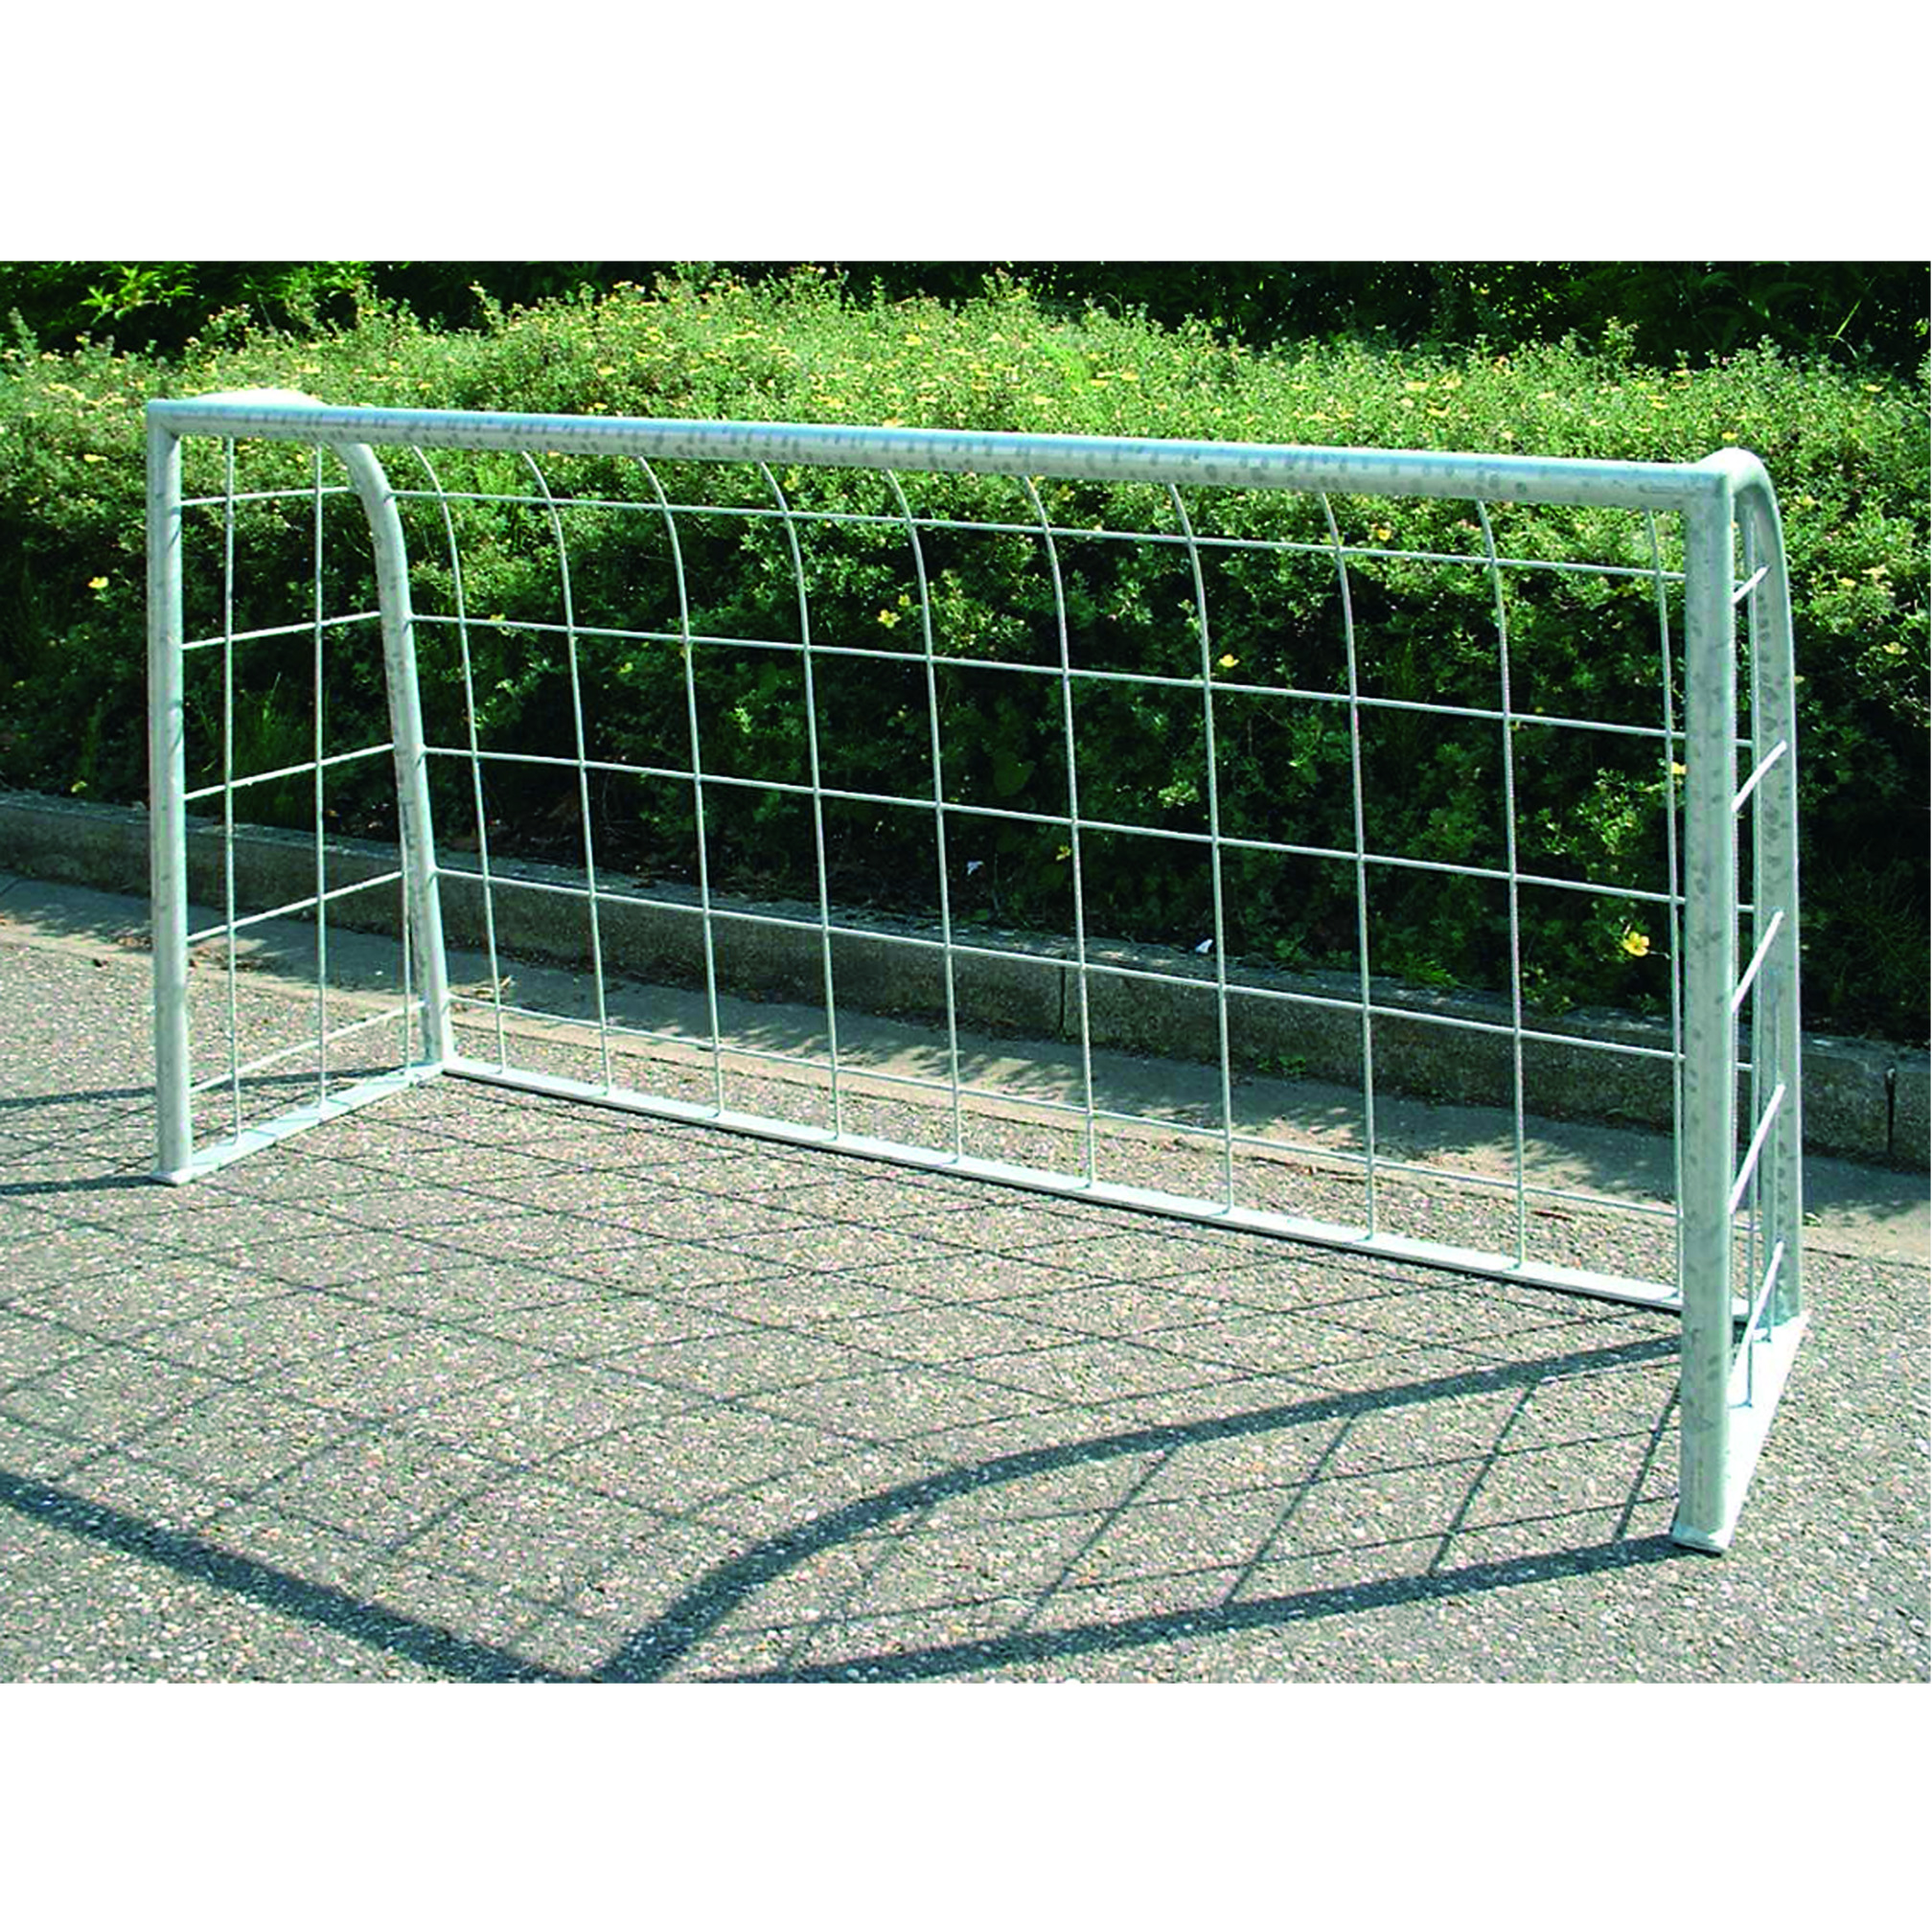 Training goal with galvanised steel wire net